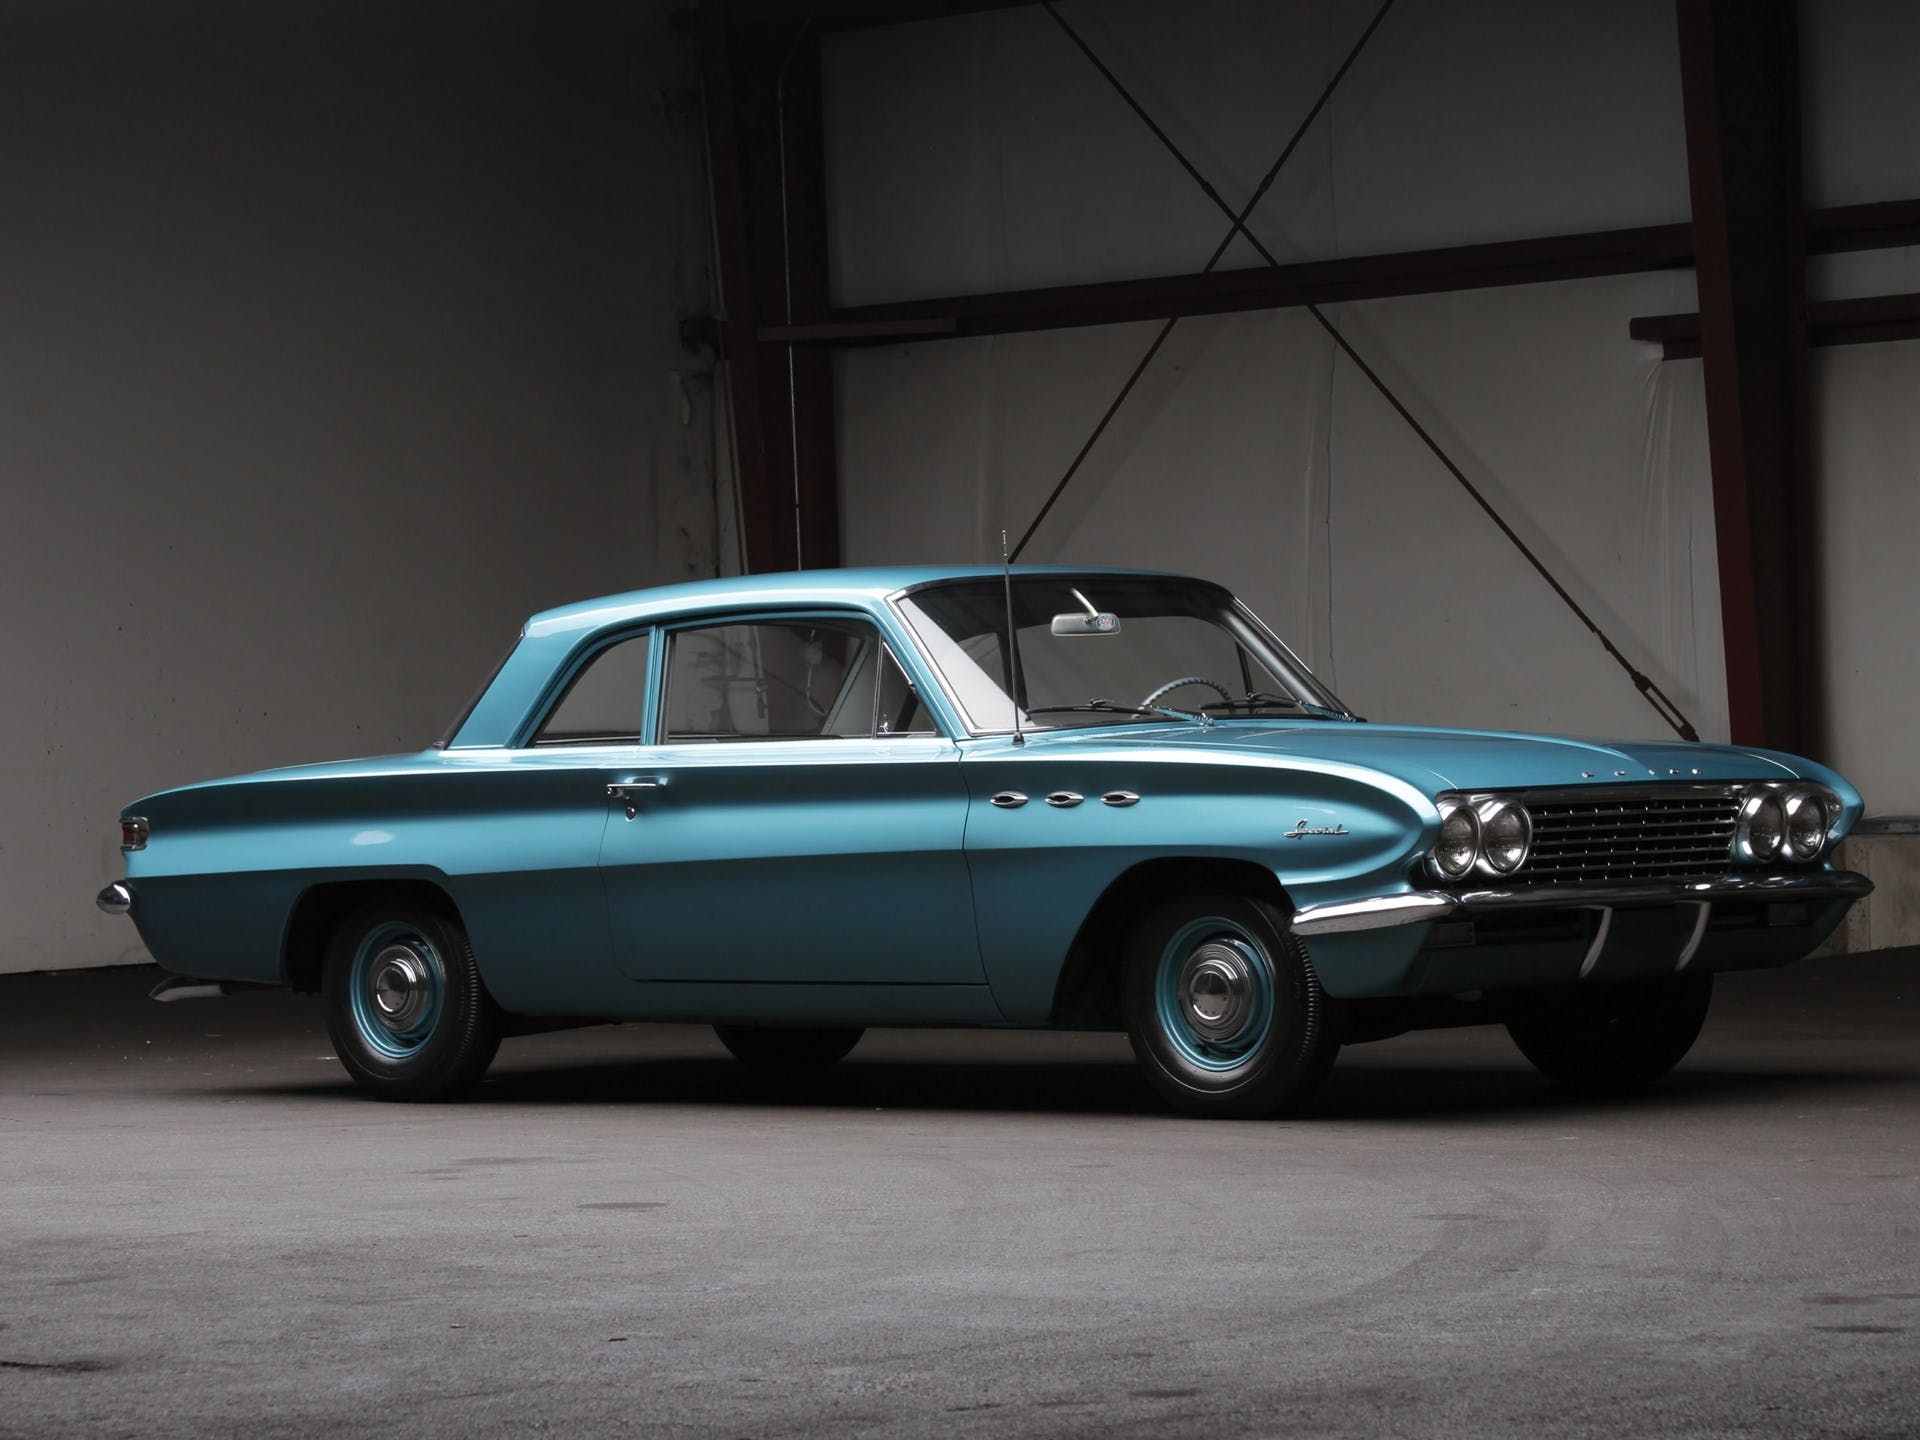 1961 Buick Special: The last year for the standard aluminum V8.